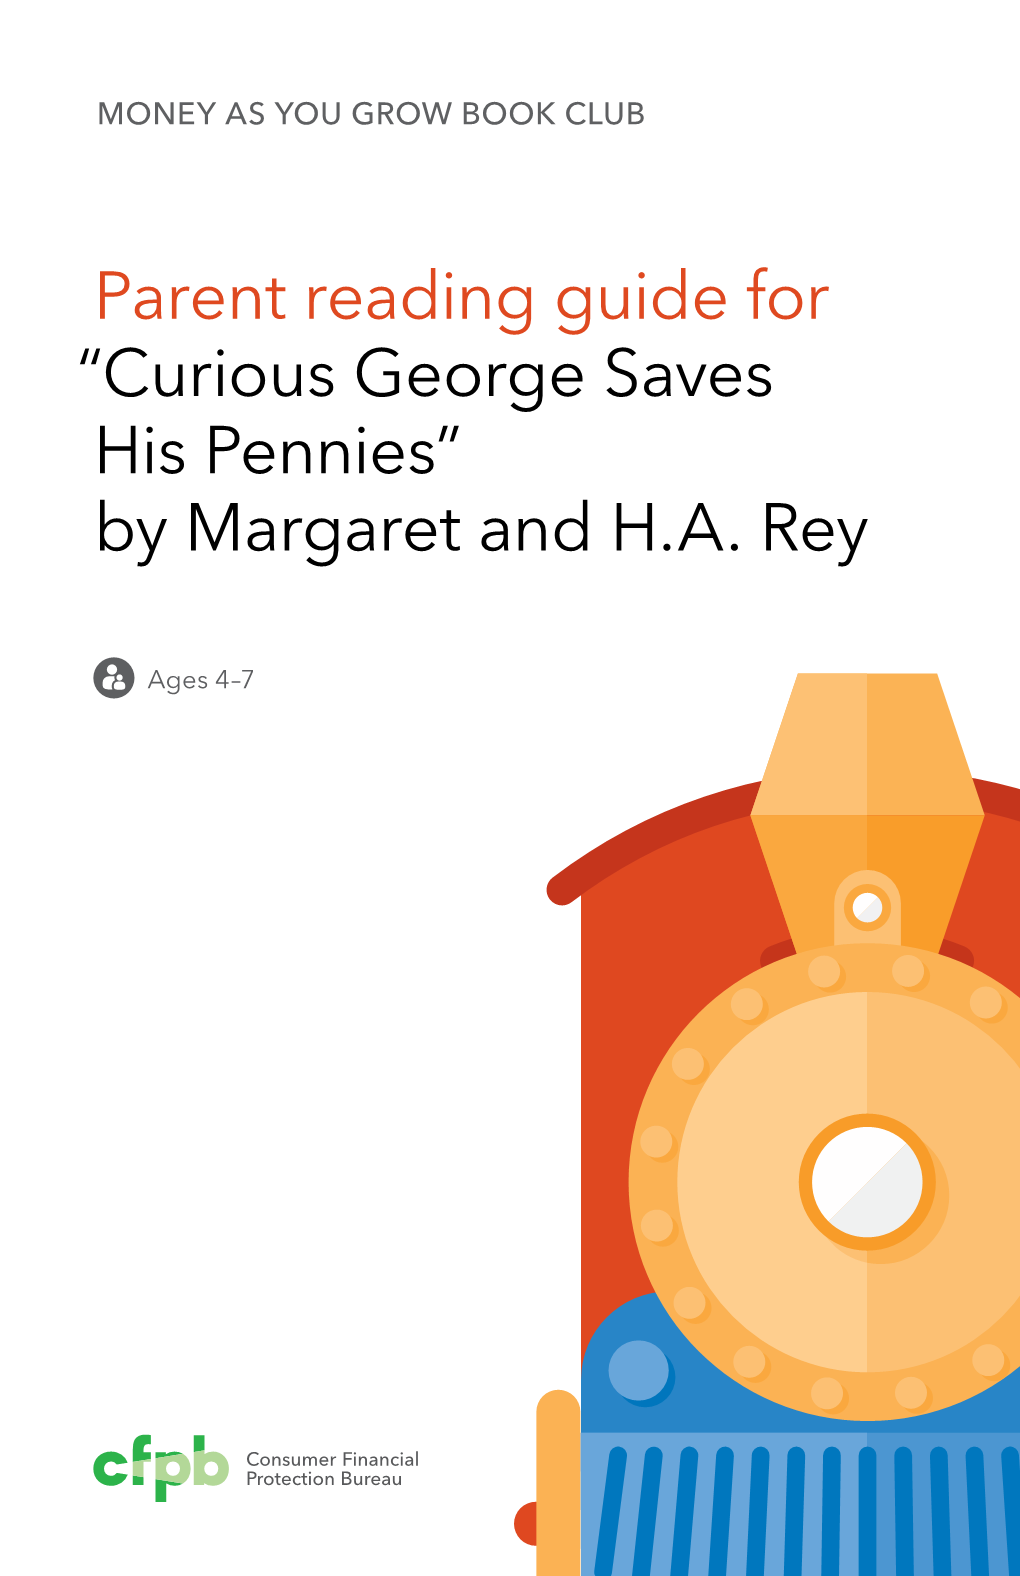 Urious George Saves His Pennies” by Margaret and H.A